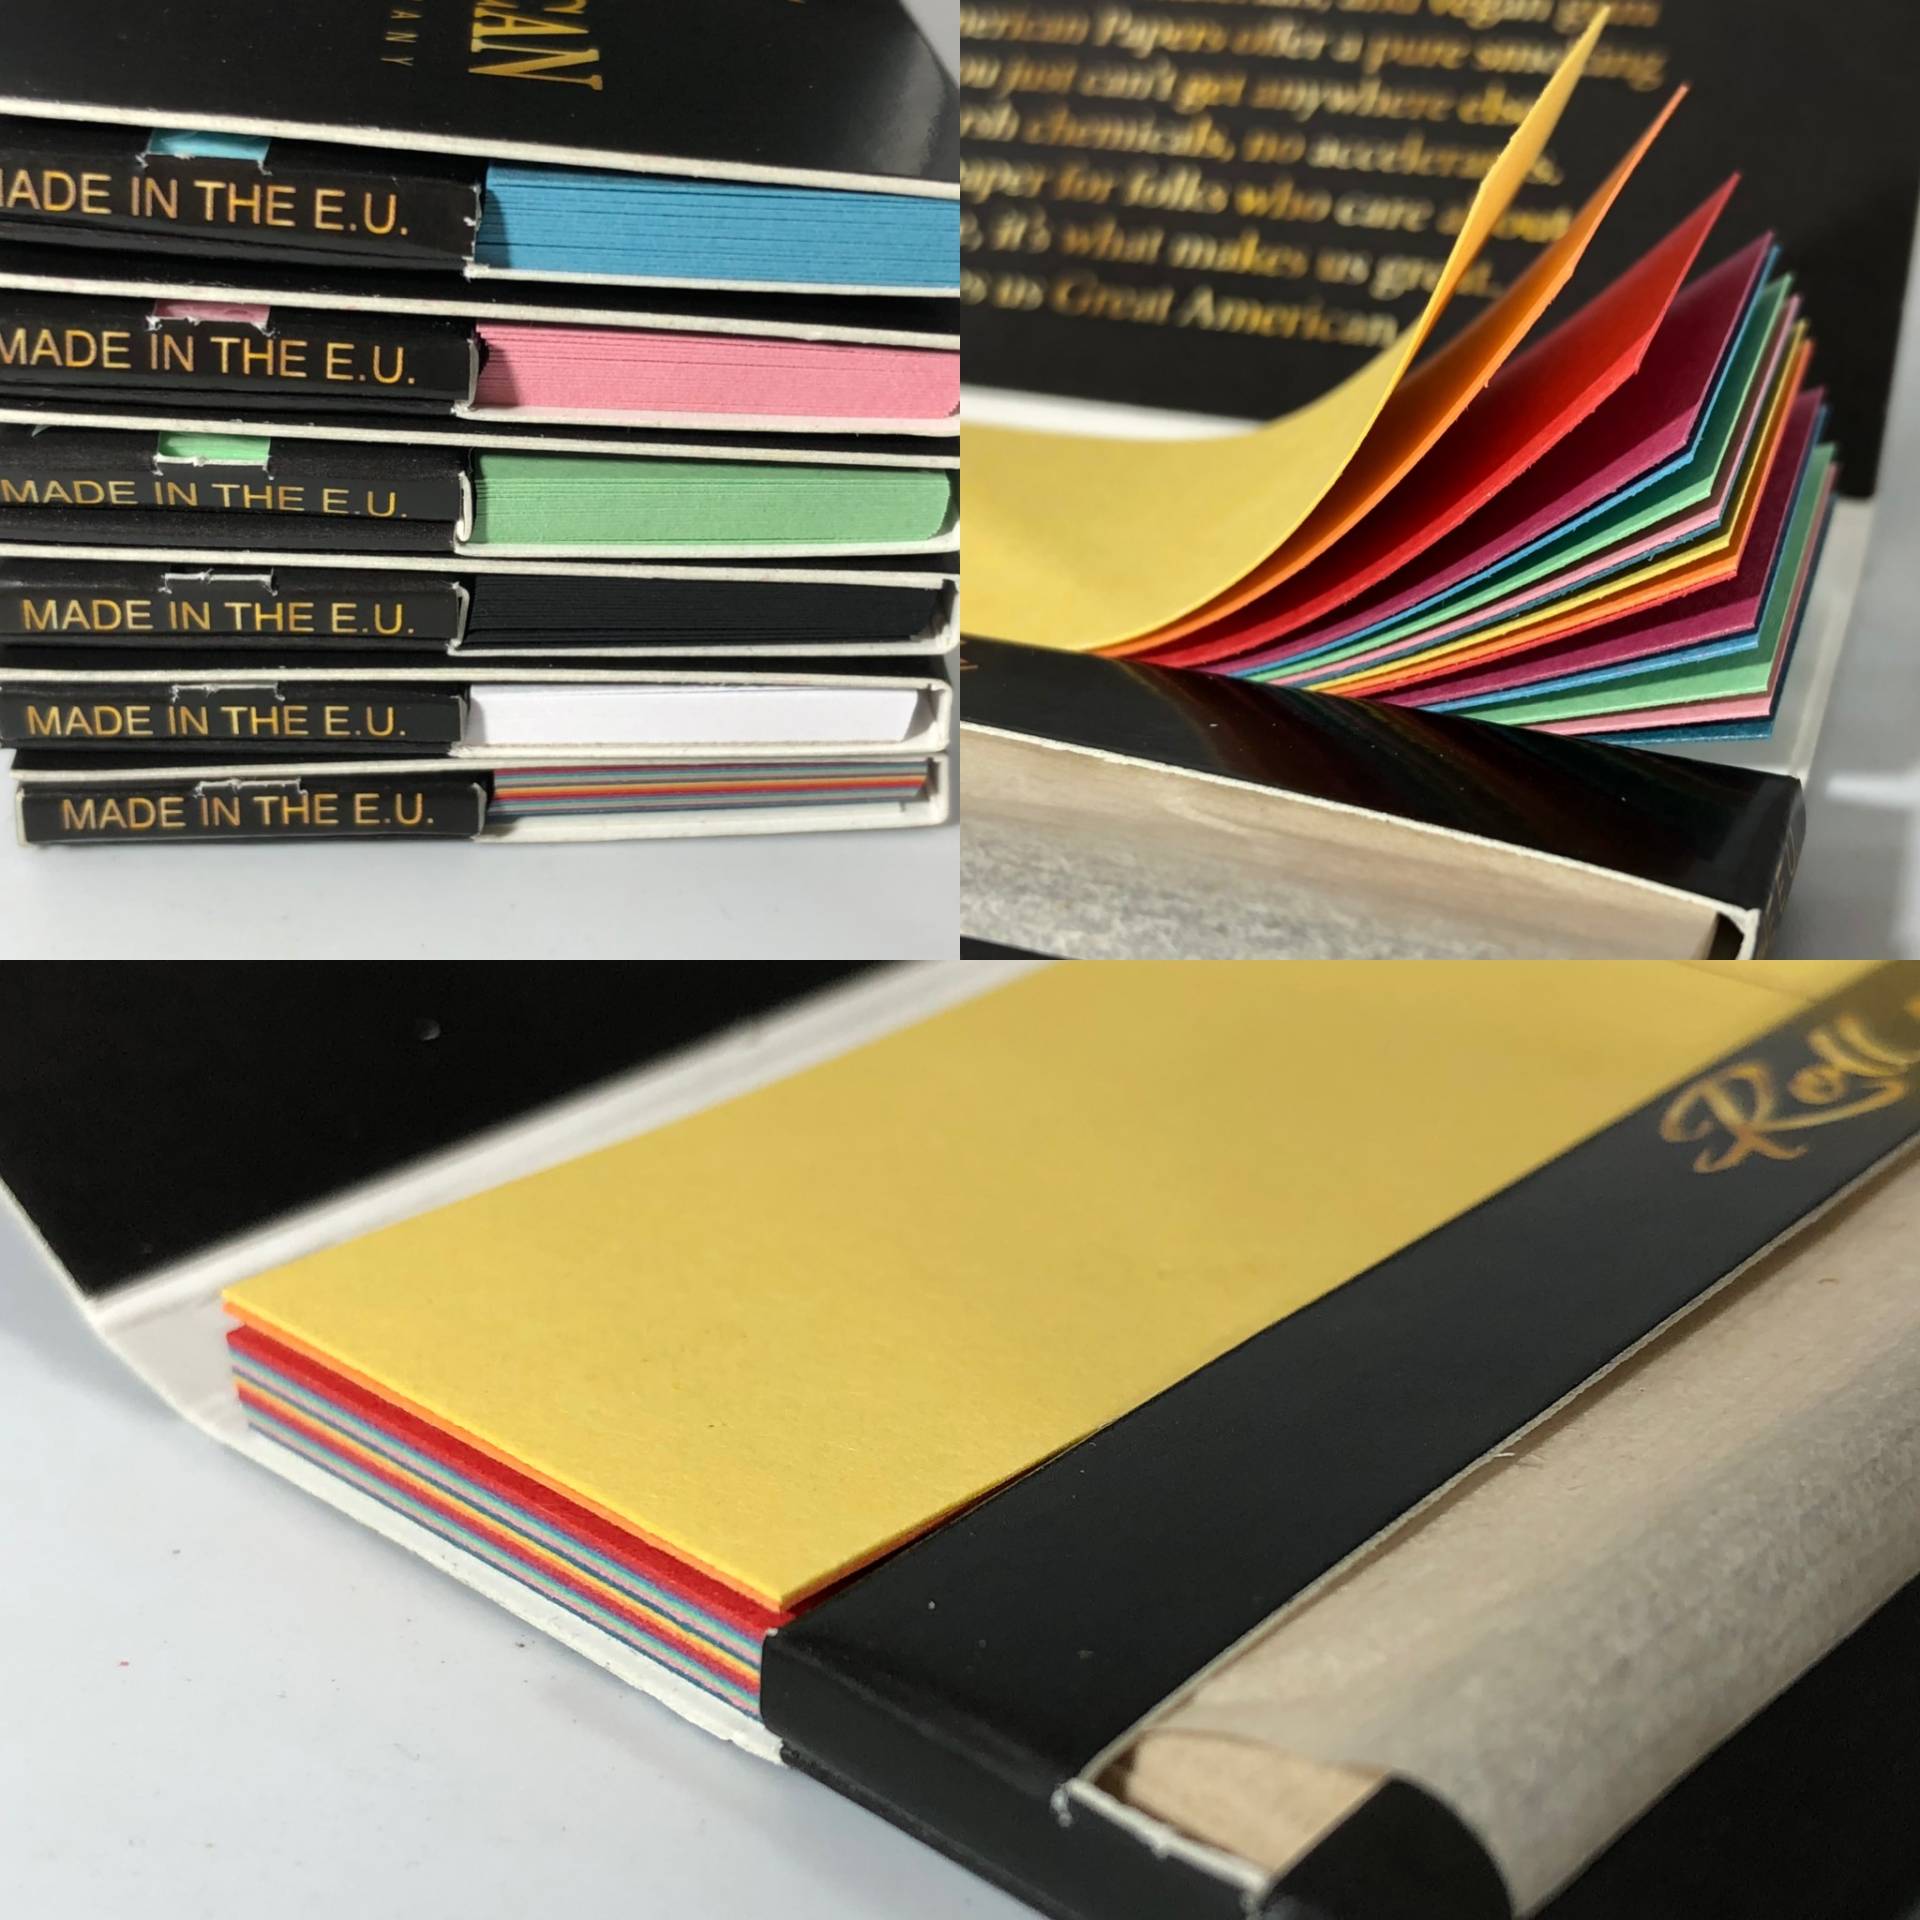 Custom Printed Rolling Paper  Your design on paper, booklet and display  box! – ROLL YOUR OWN PAPERS.COM